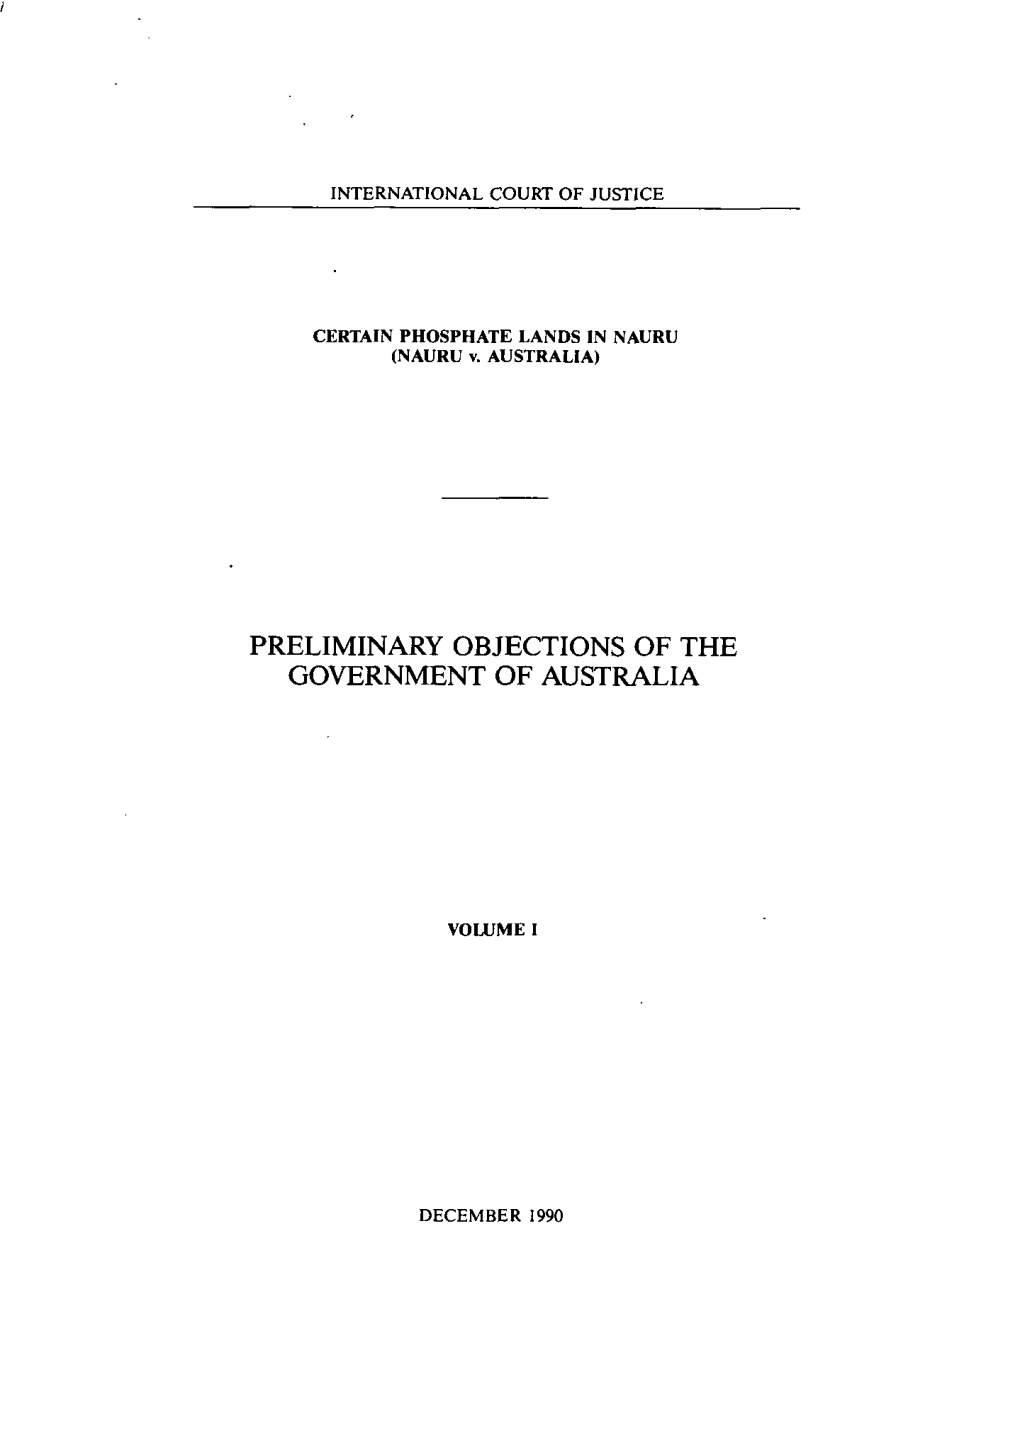 Preliminary Objections of the Government of Australia